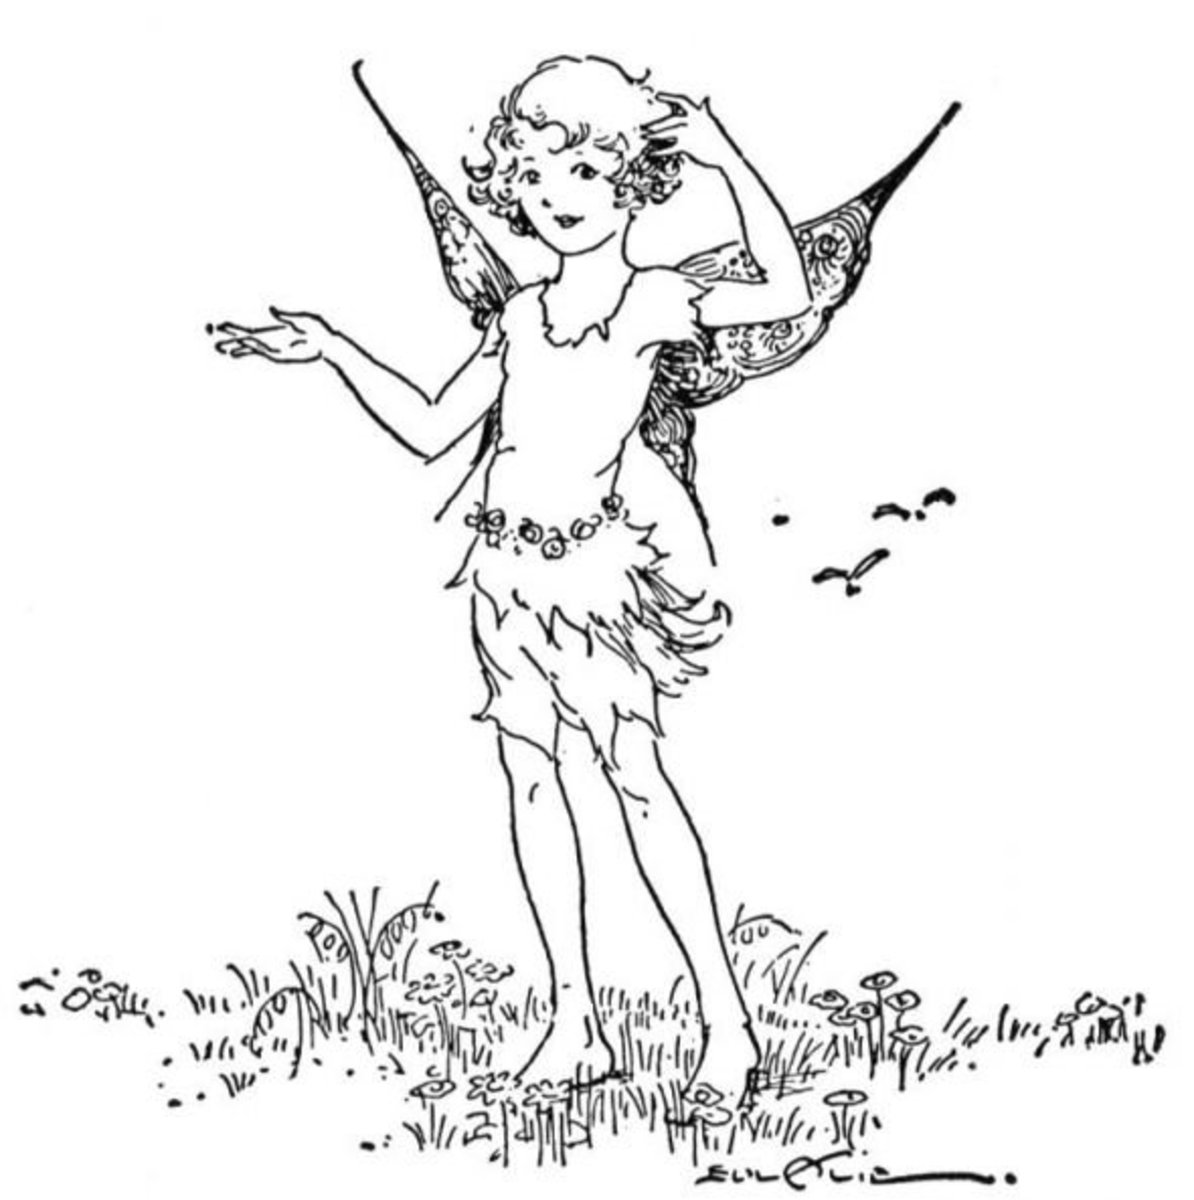 Have you ever seen a fairy in your garden?